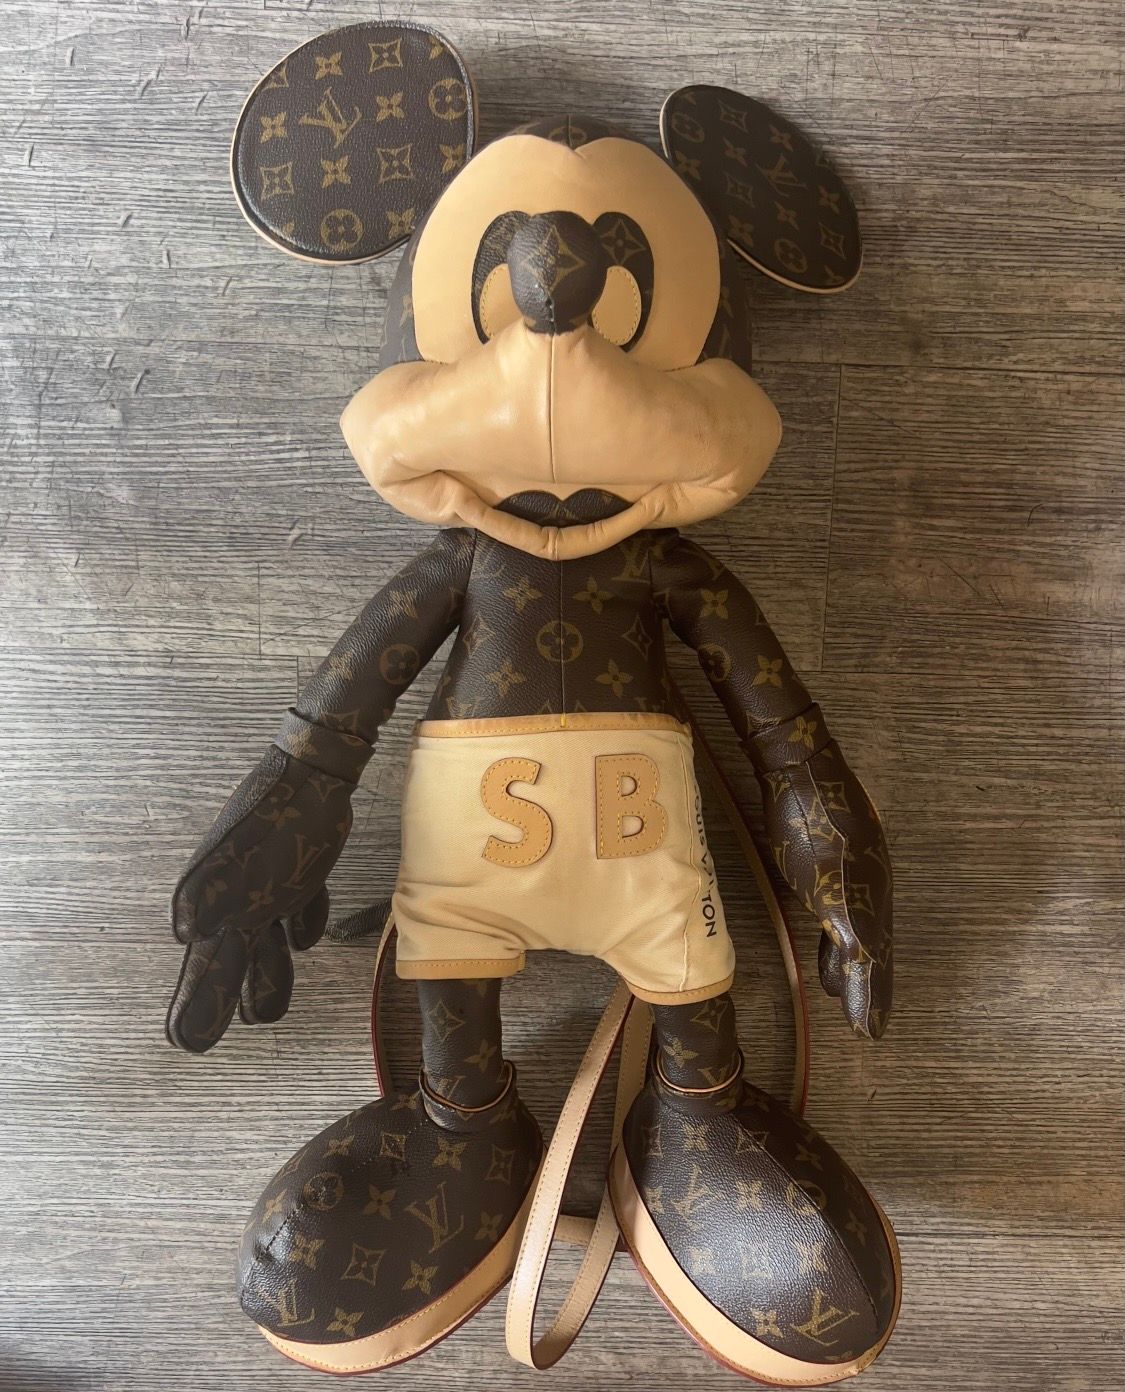 Sheron Barber x Louis Vuitton Mickey Mouse Bags Are Here